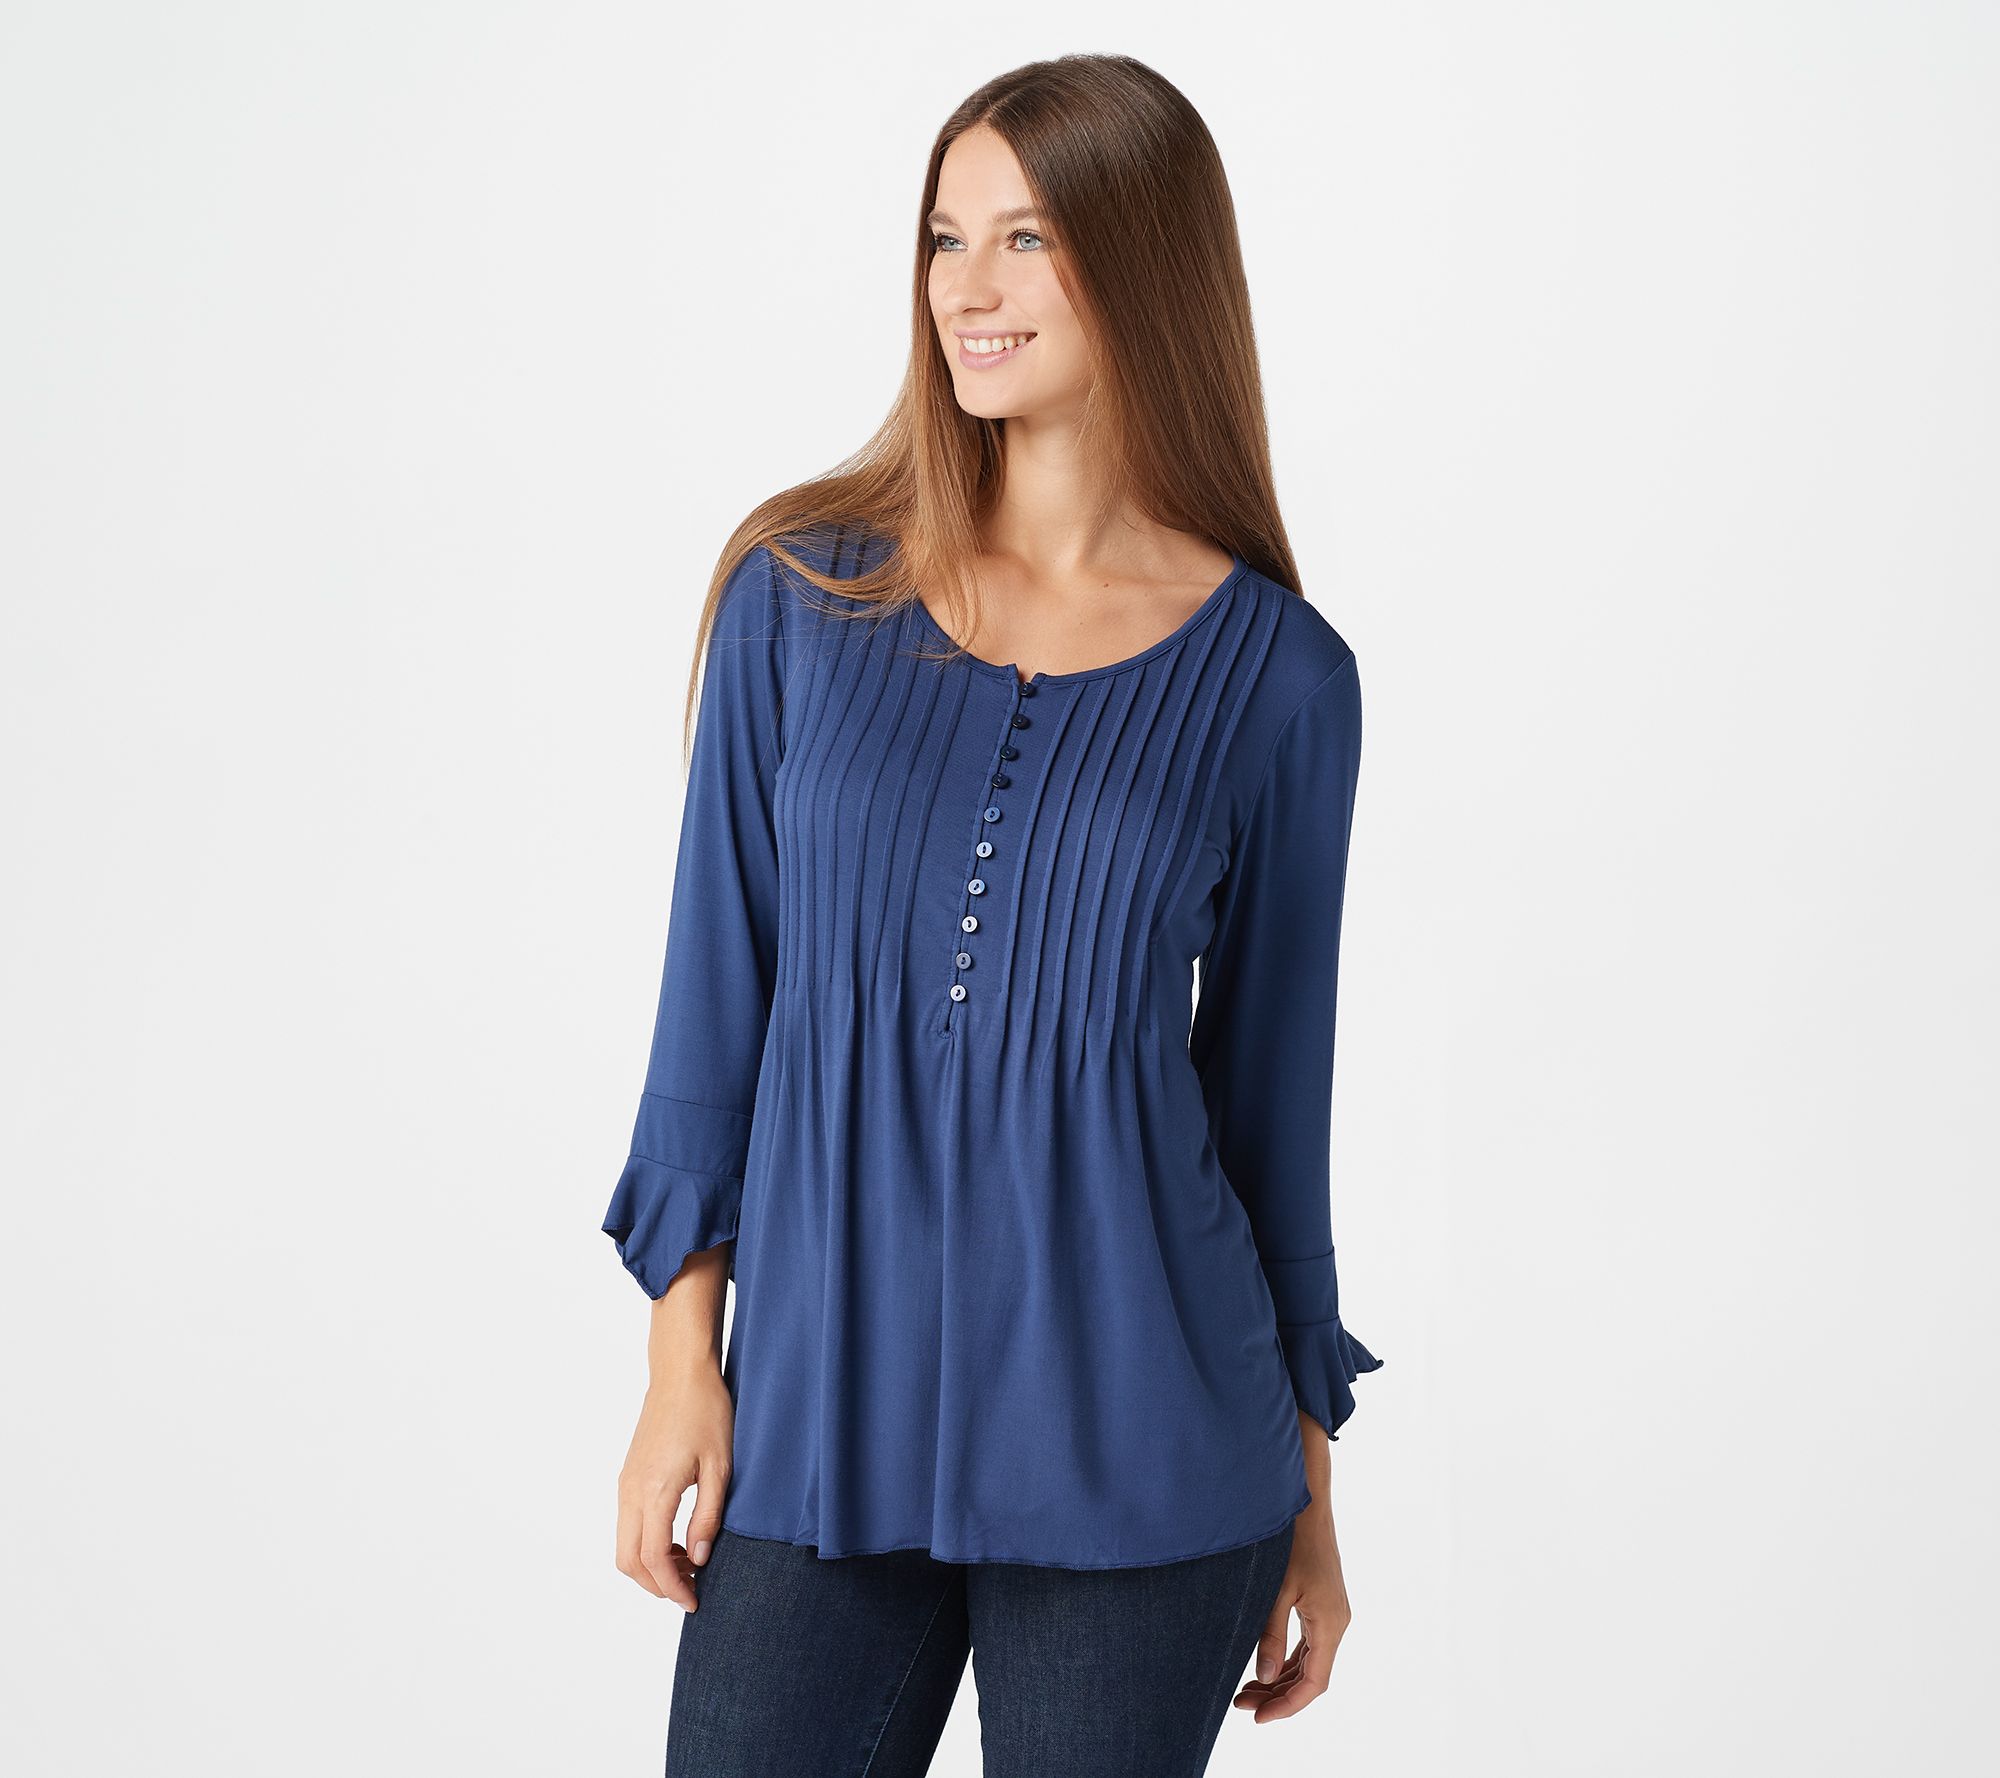 Laurie Felt Knit Rayon Made From Bamboo Blend Henley Top - QVC.com